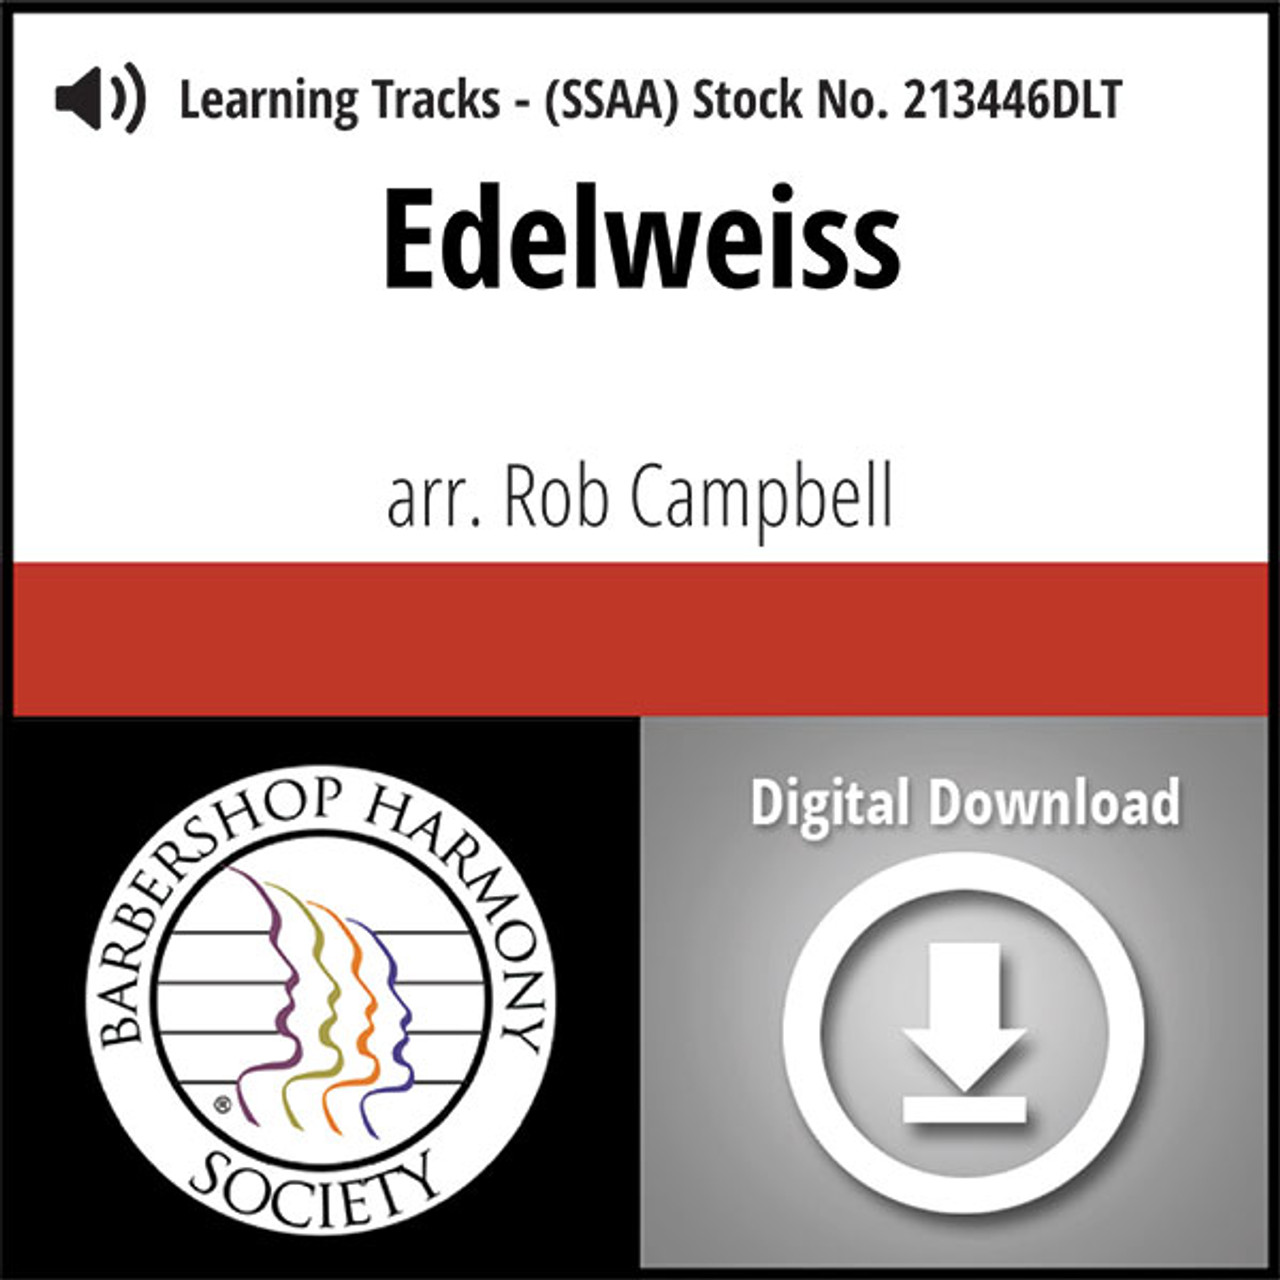 Edelweiss (SSAA) (arr. Campbell) - Digital Tracks for 213445